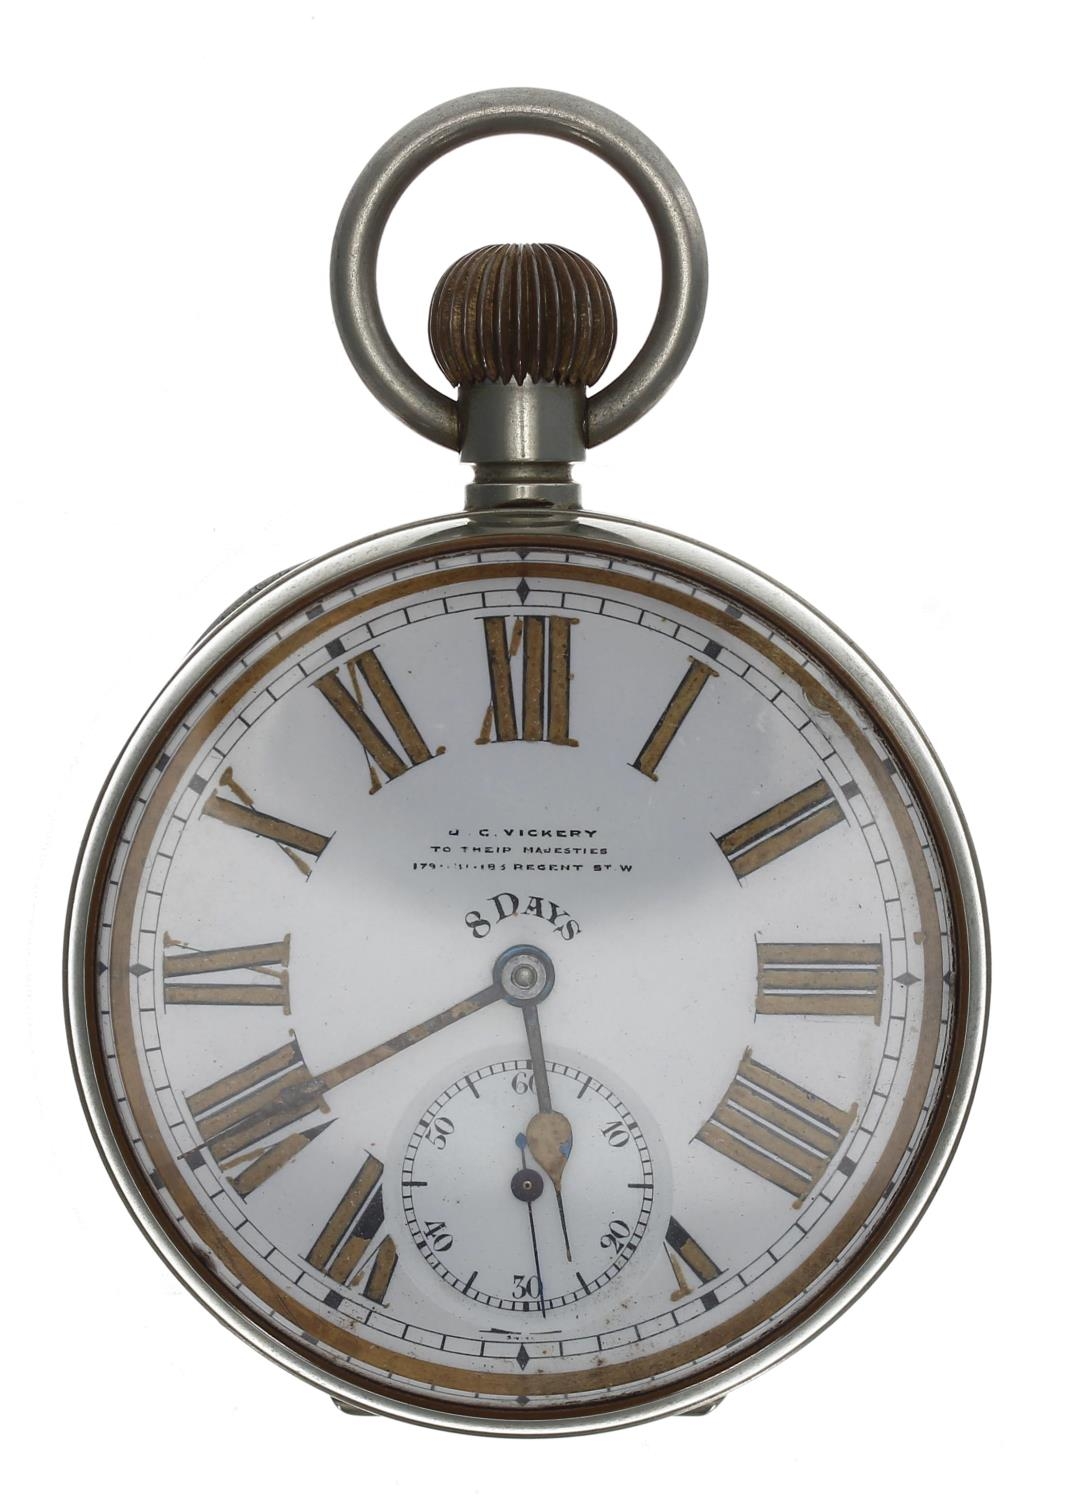 Goliath 8 days nickel cased lever pocket watch, the movement stamped Brevet, no. 33236, with